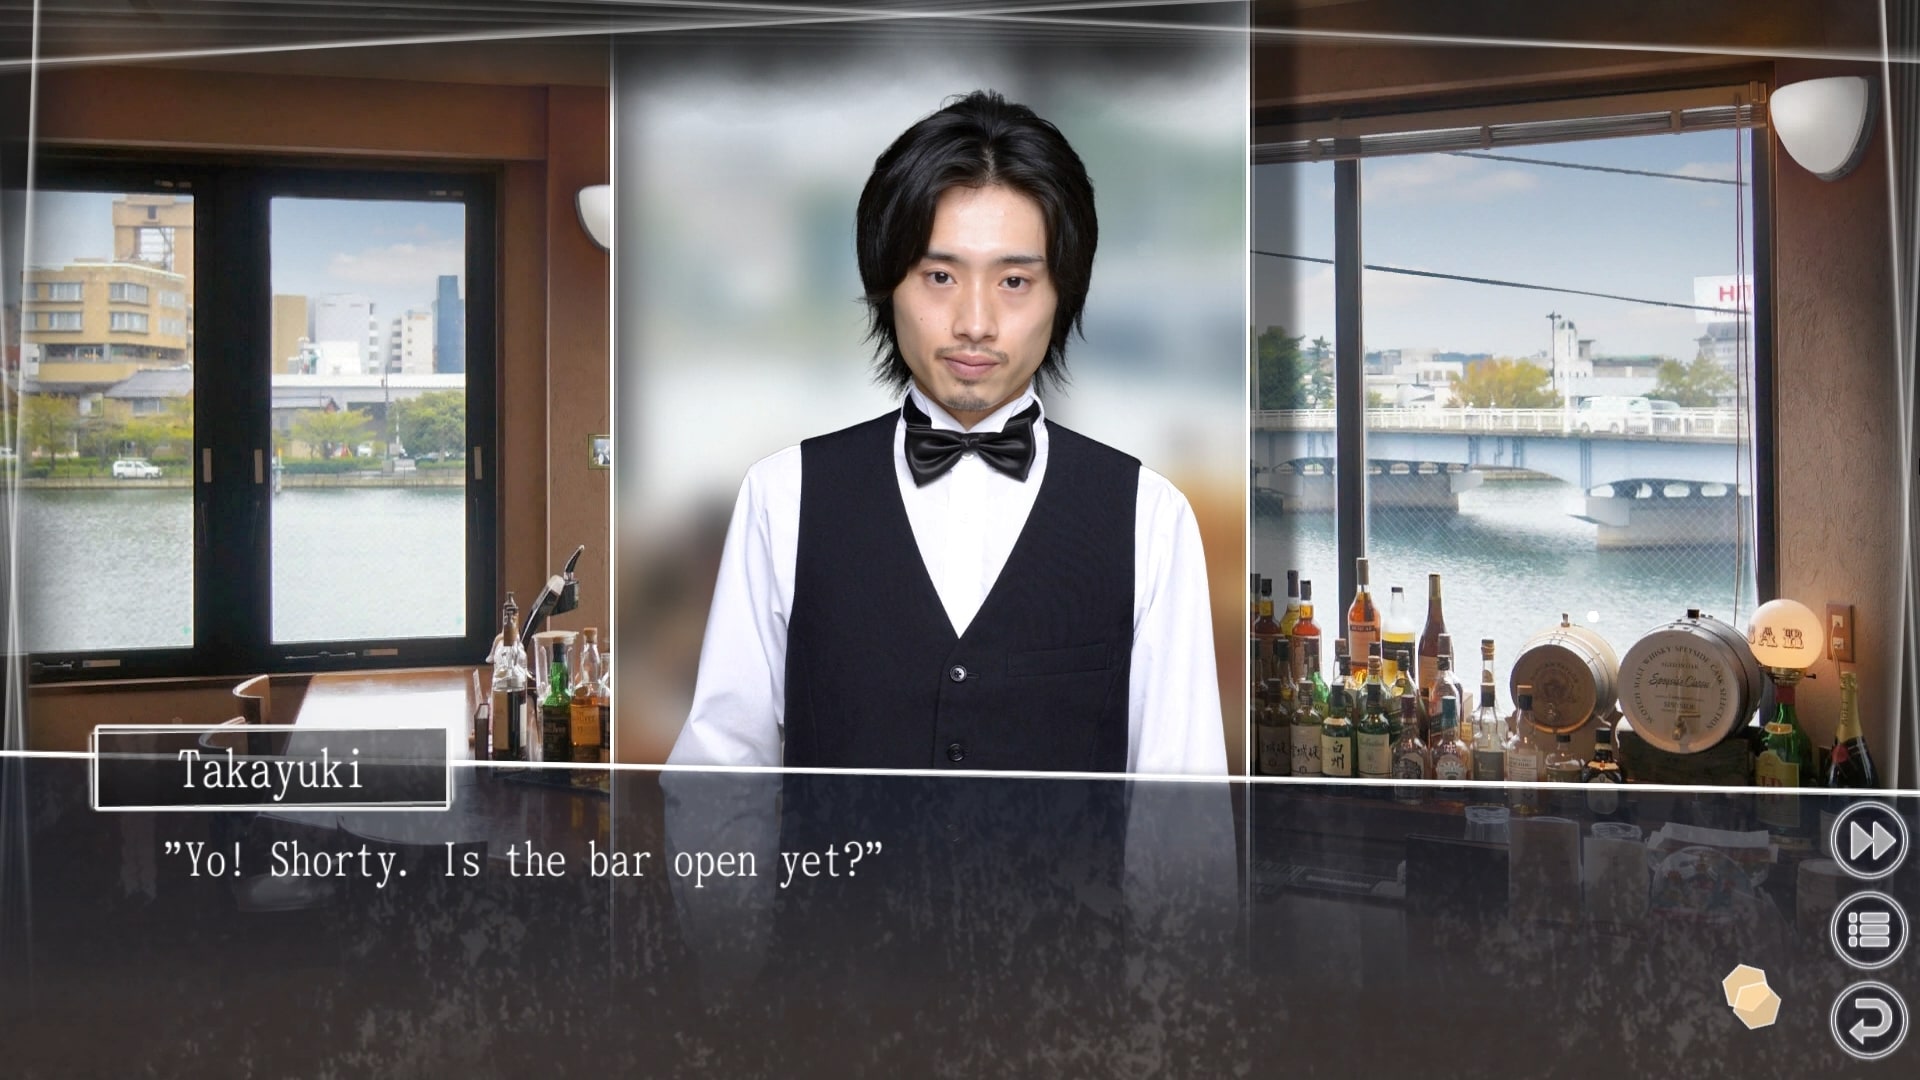 Root Letter Last Answer - Additional Scenarios for Root Letter Last Answer - Scenario 3: The Nakamura Bar Special Cocktail - A888EF2